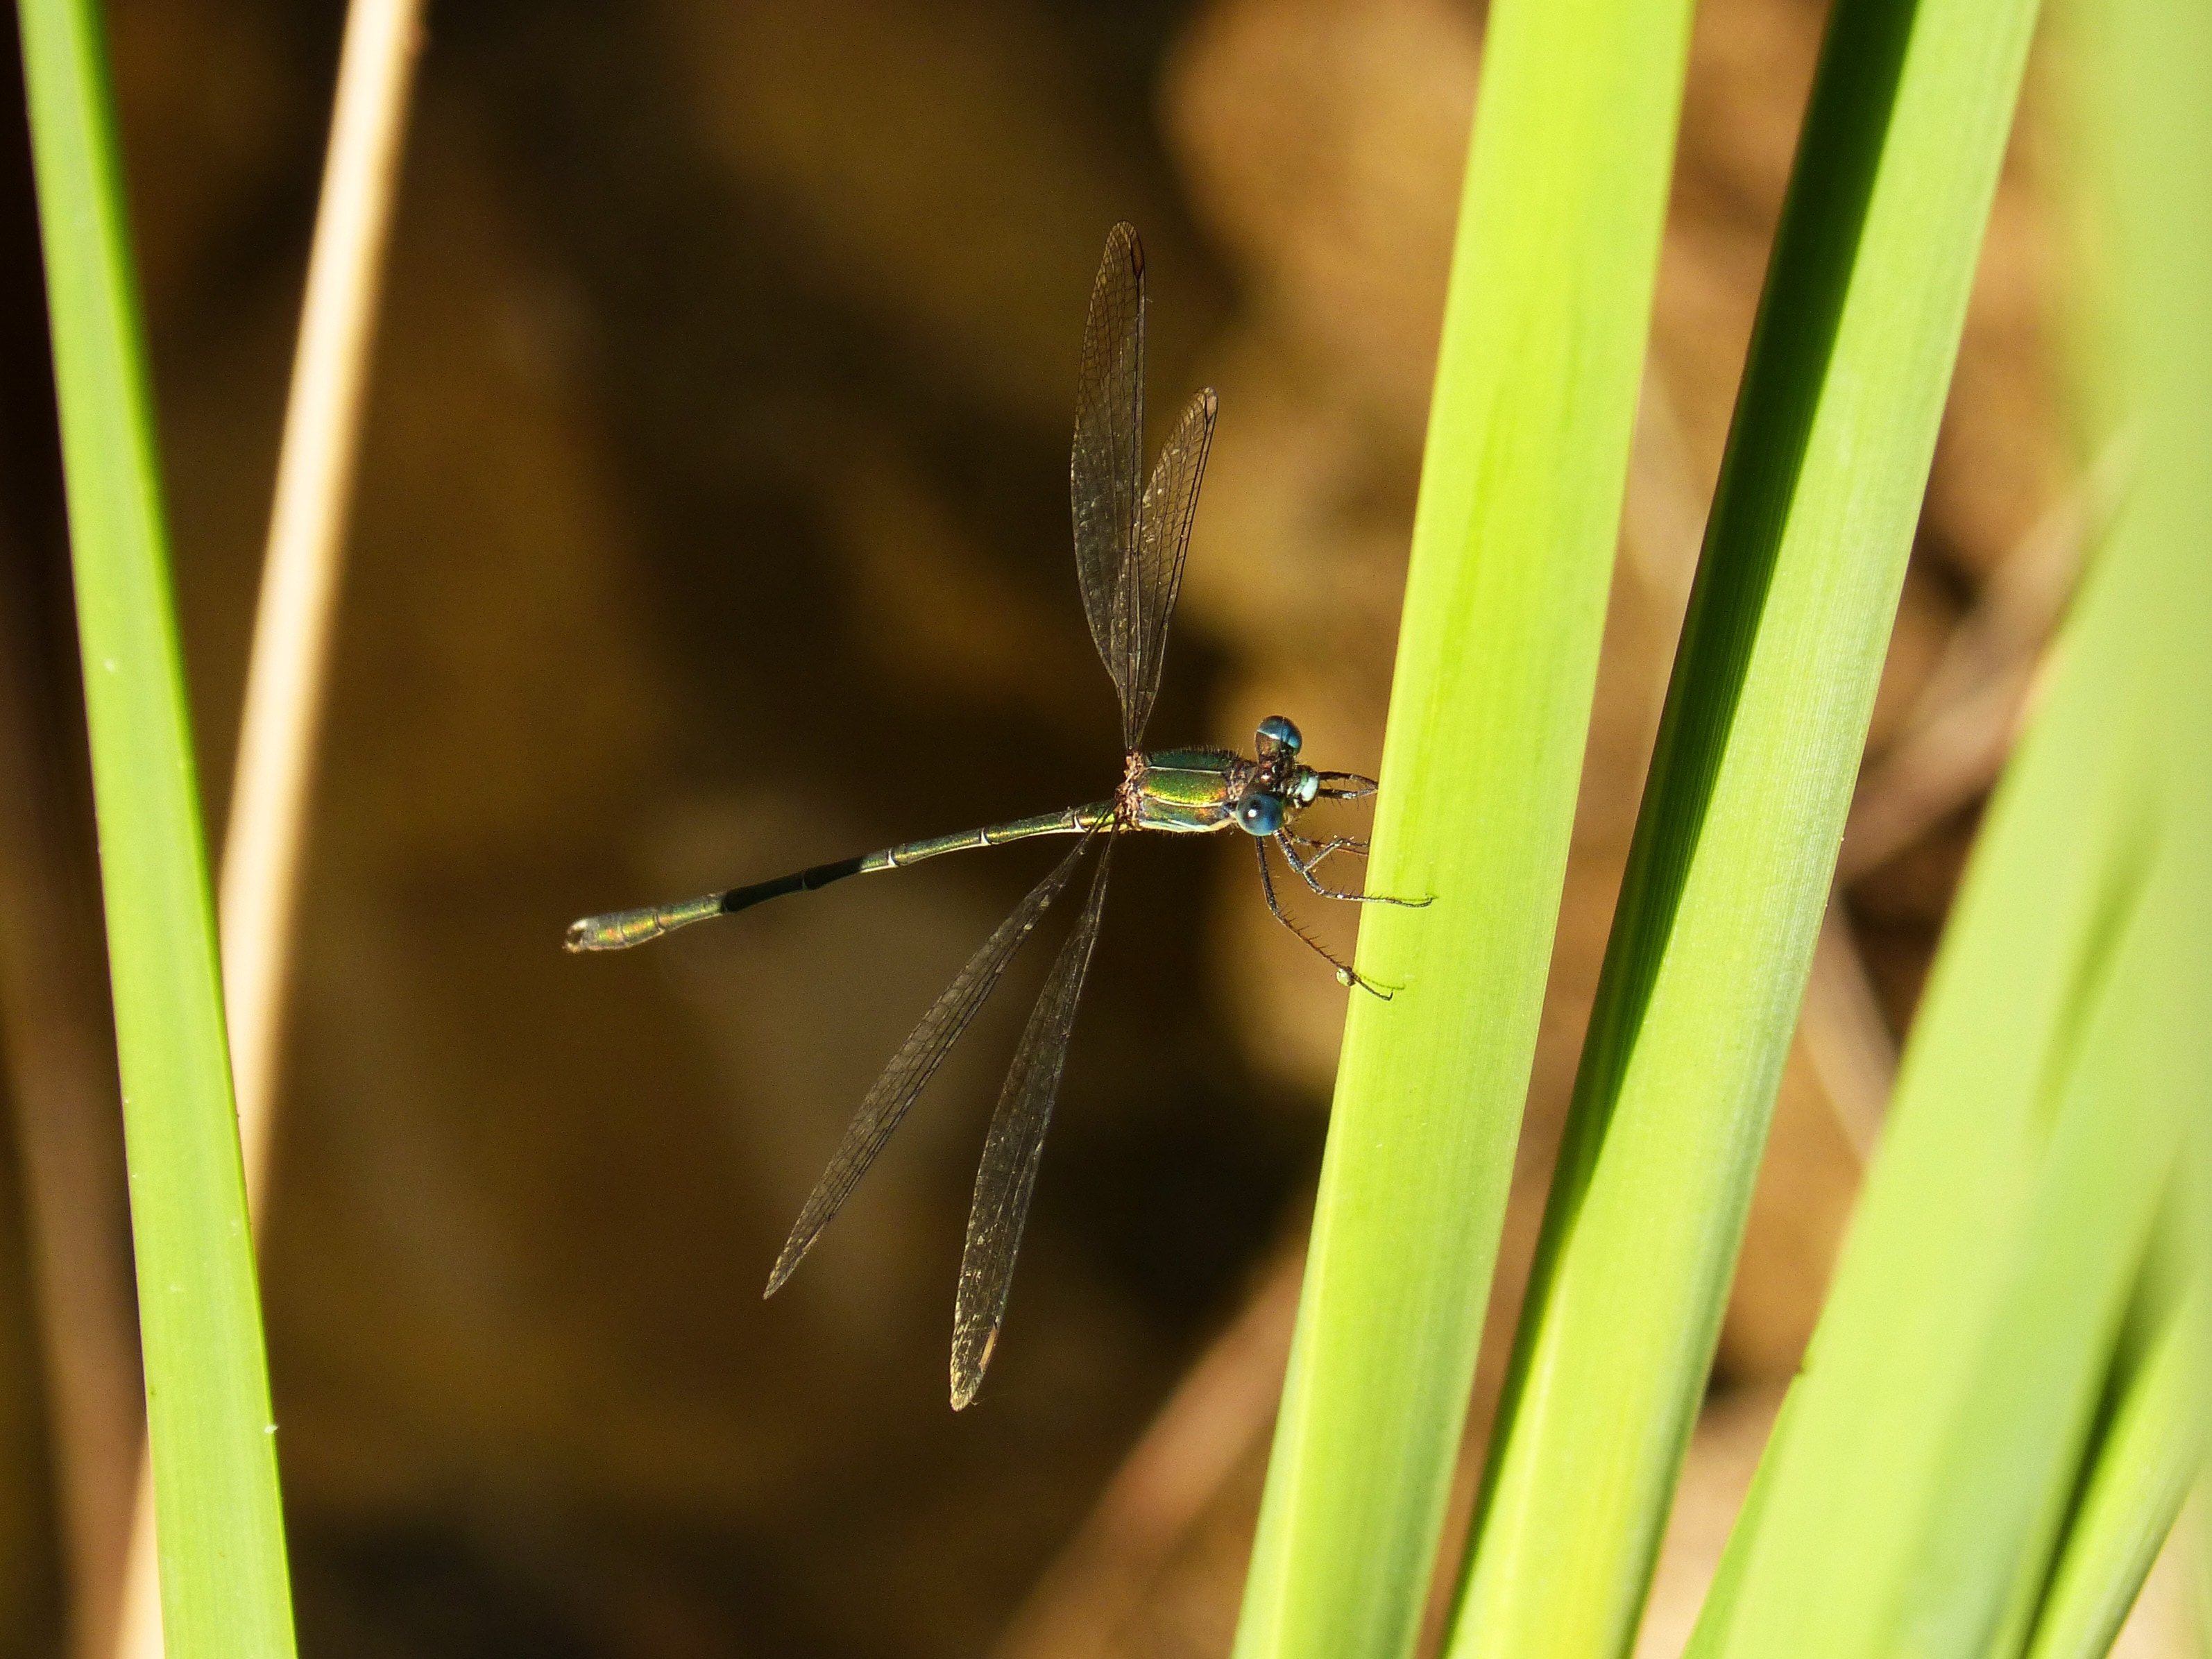 River, Dragonfly, Leaf, Green, insect, one animal